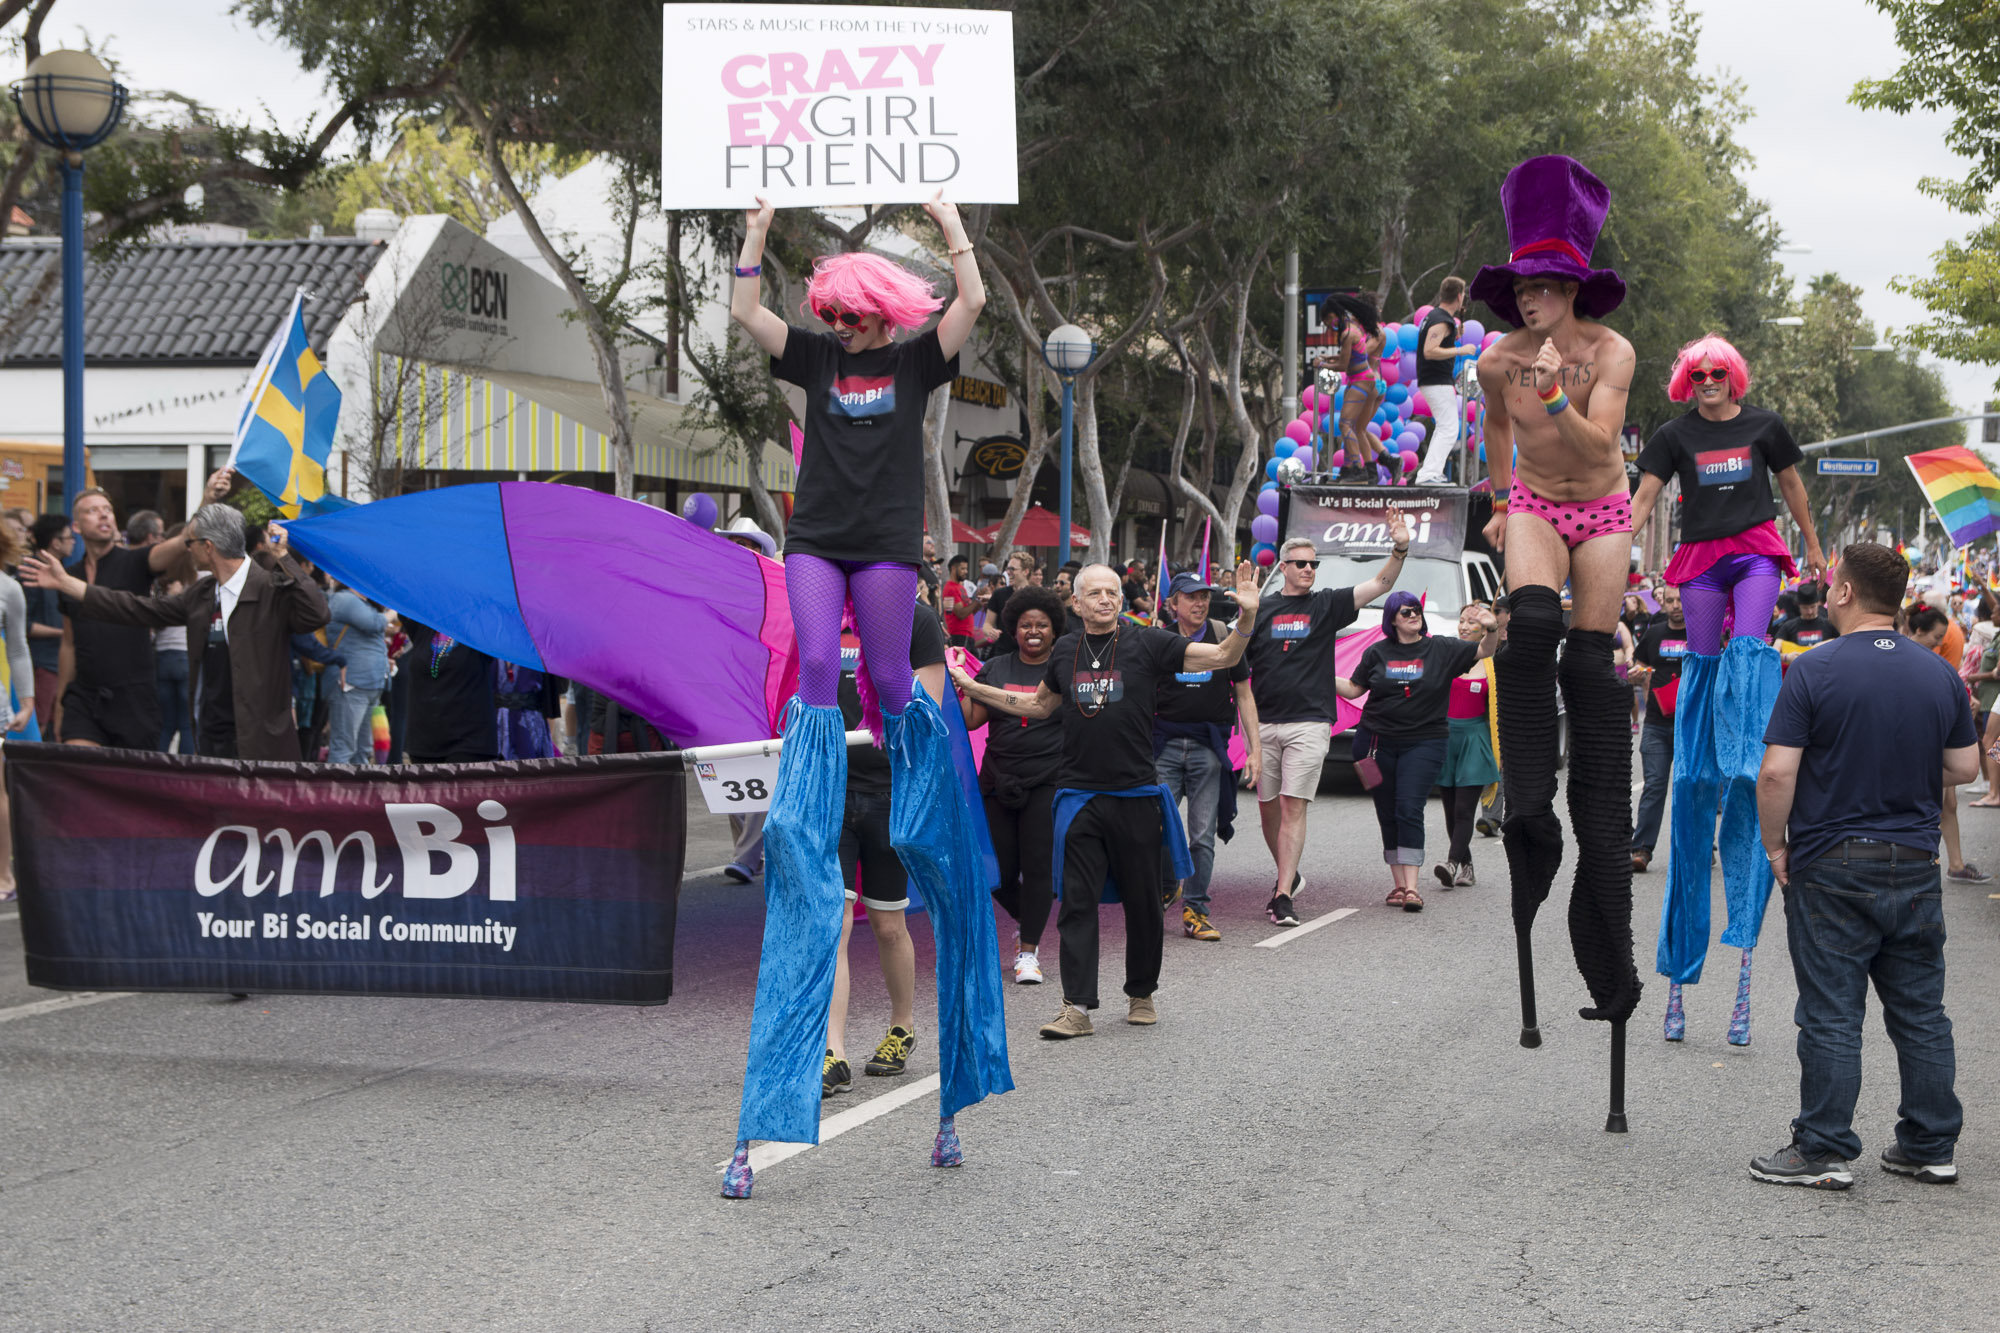 Performers from "Crazy Ex Girlfriend" share the street with Bi Social. (Photo by Derek Wear of Unikorn Photography)